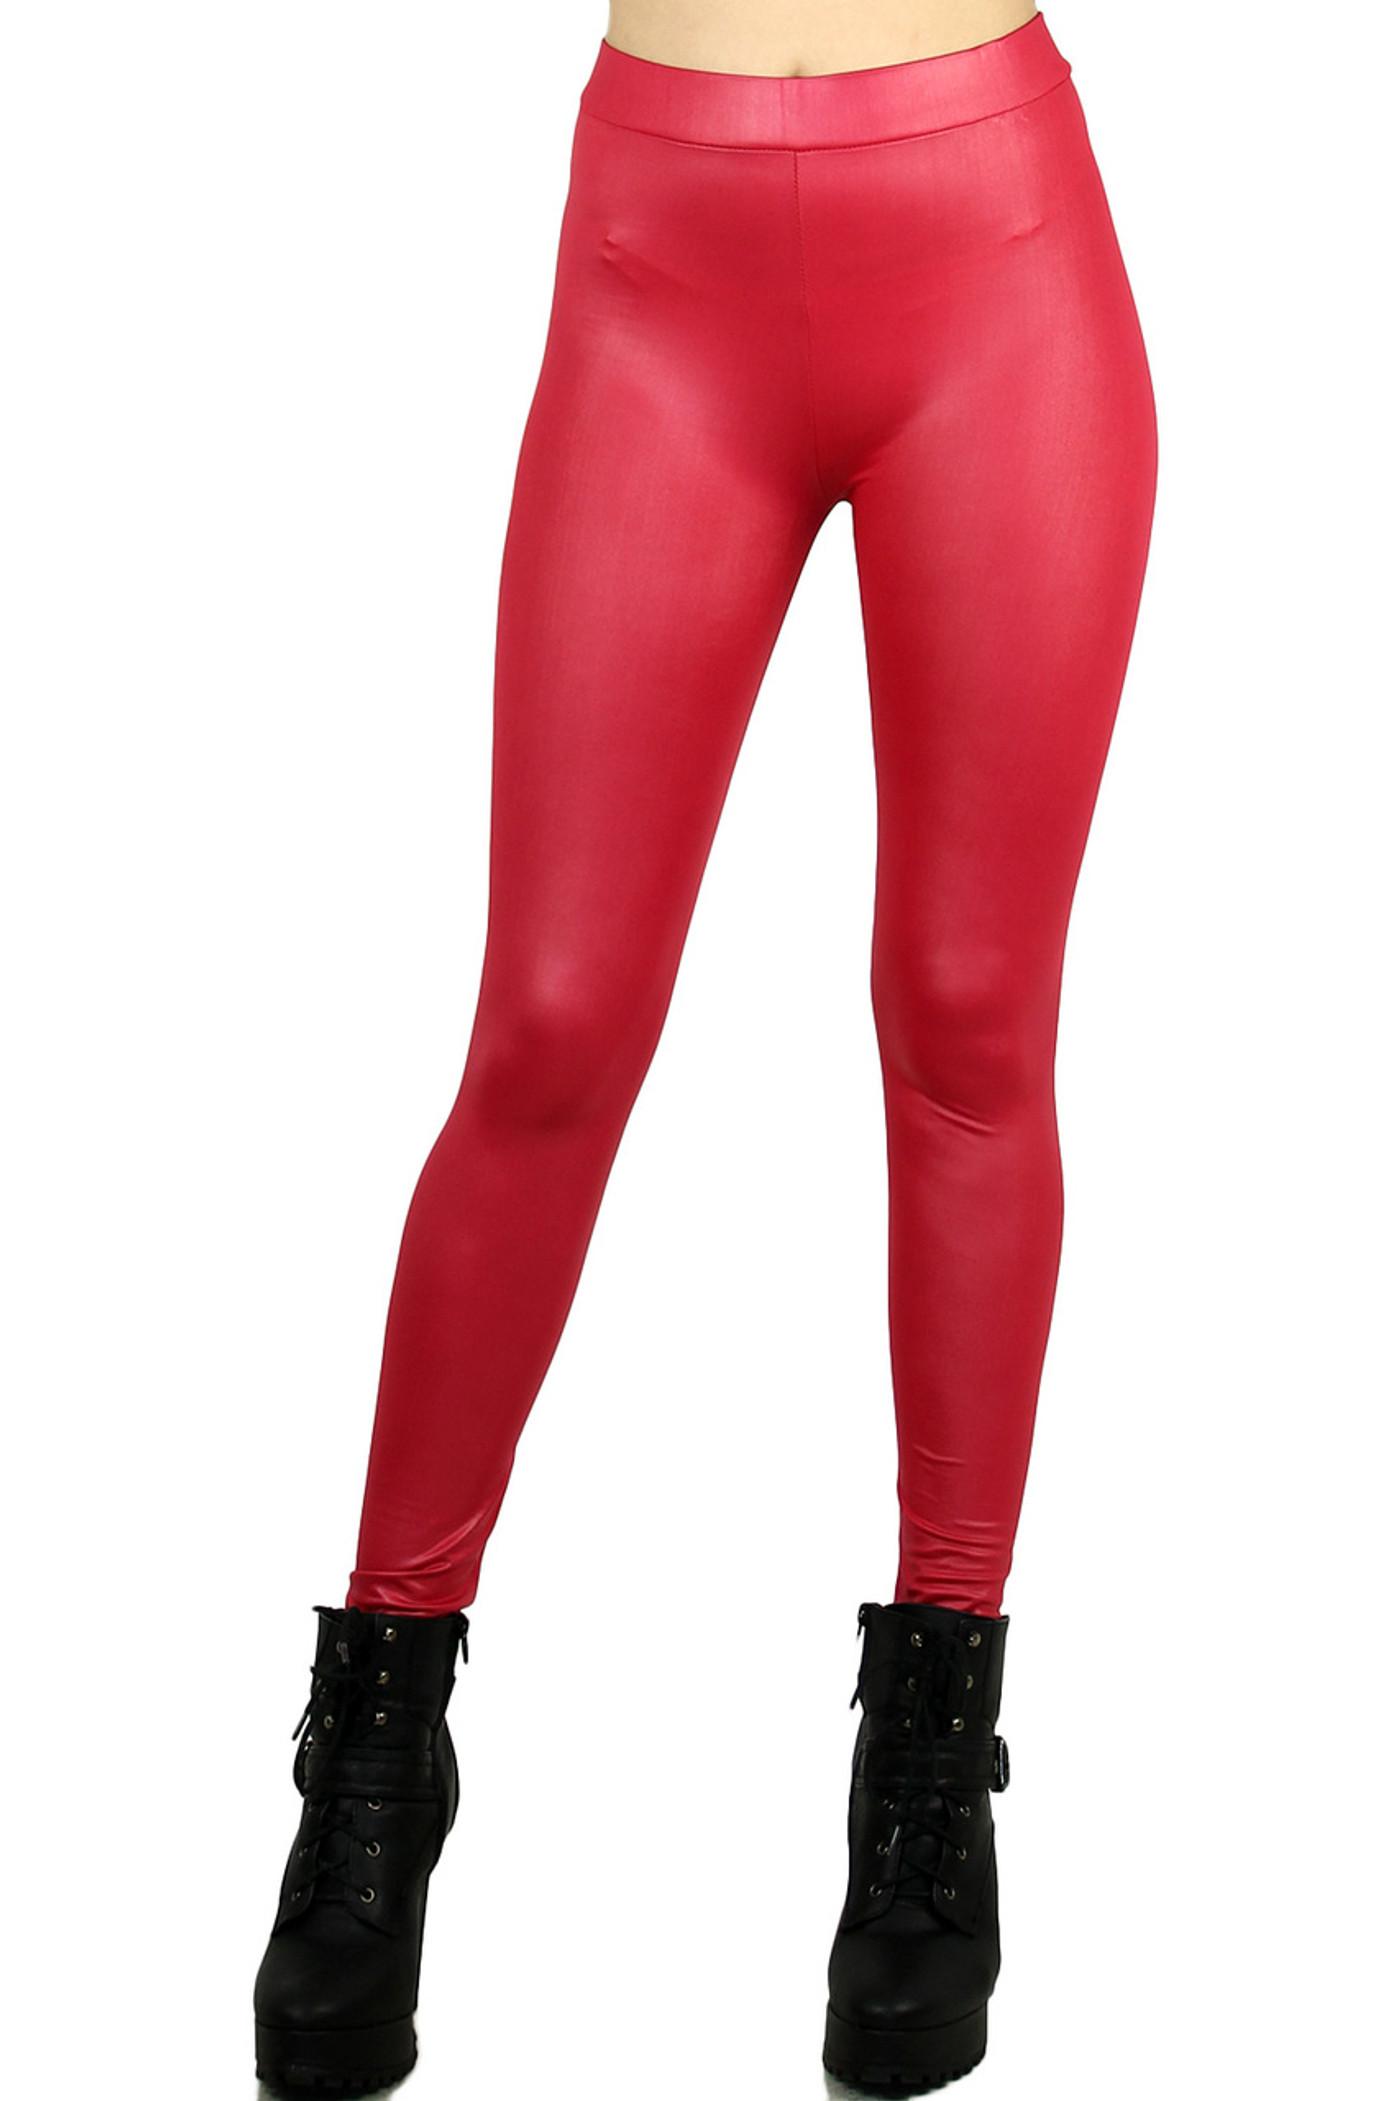 Buy GM Group Women's Cotton Leggings(GMG-1L_Red_Large) at